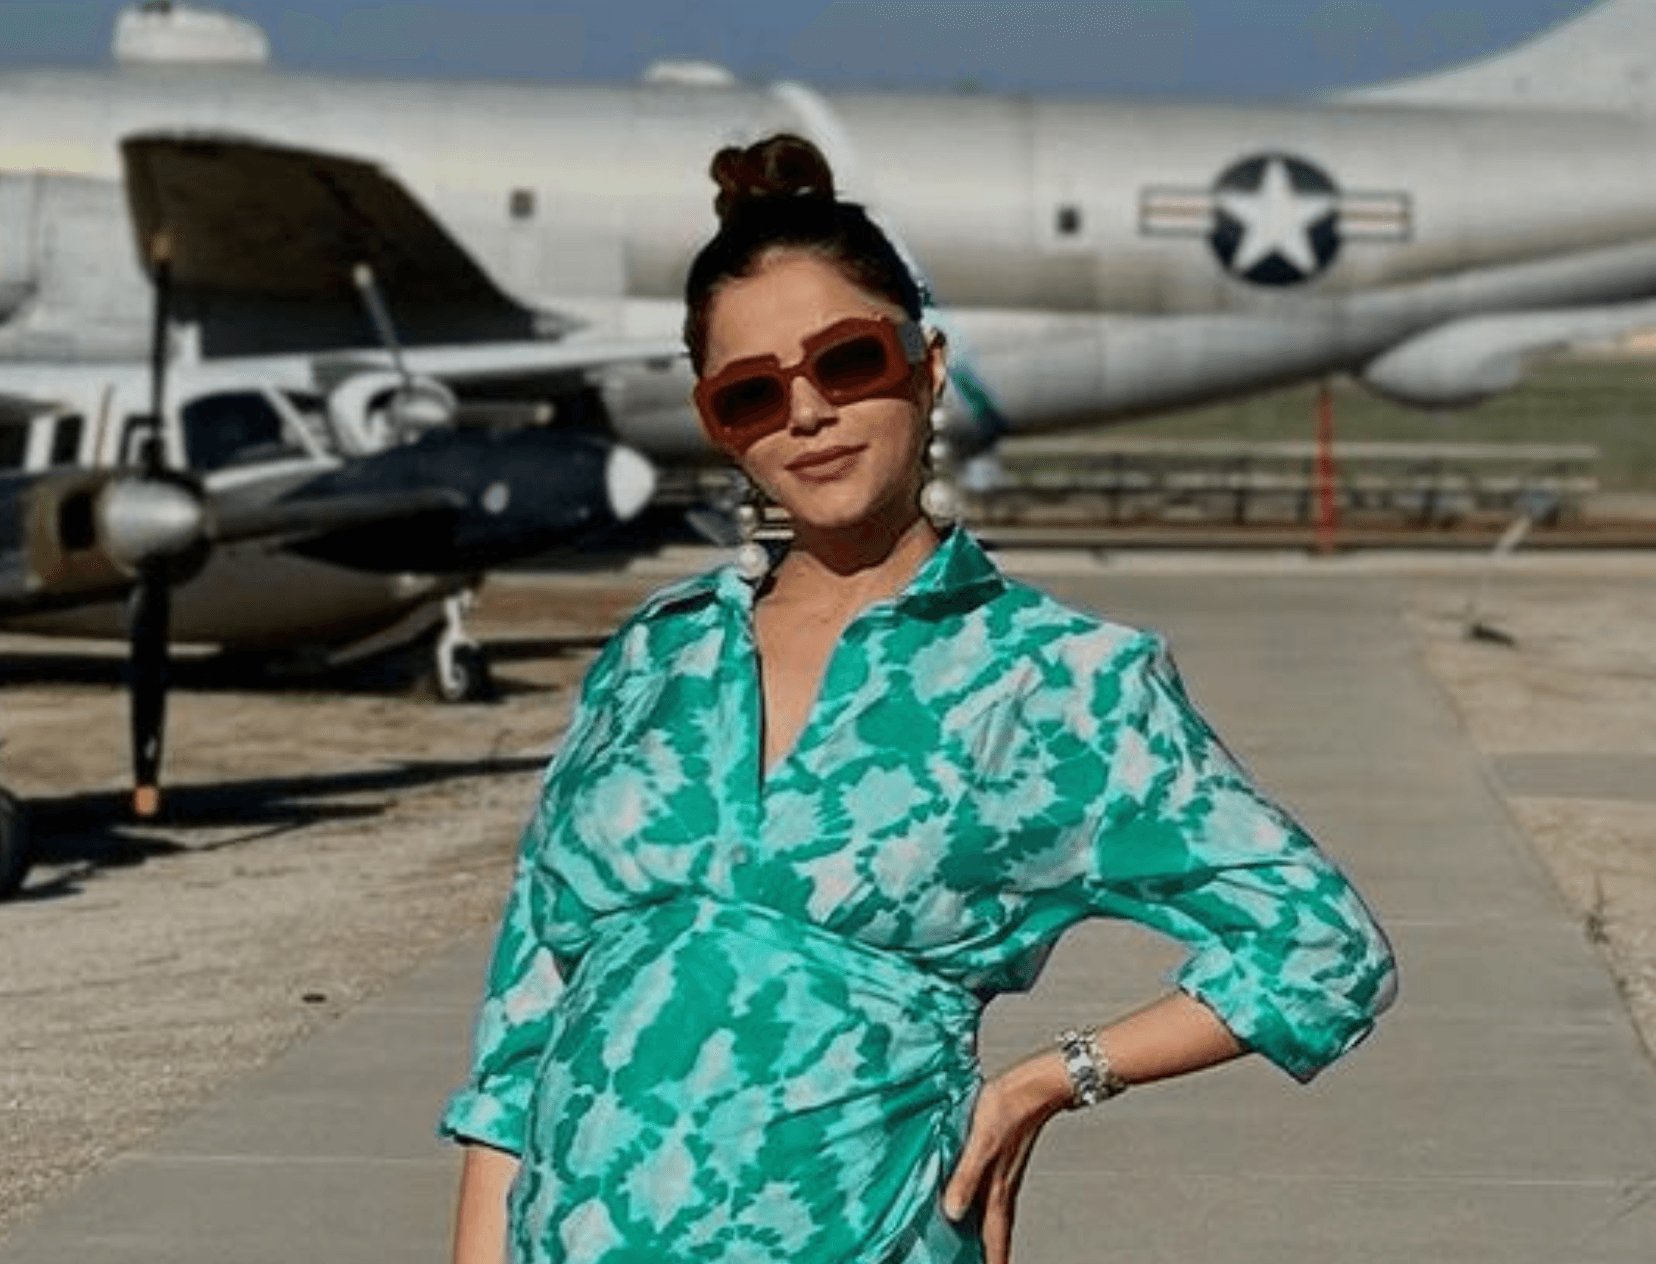 Rubina Dilaik’s Latest Maternity Fit Is A Major Inspo For Mamas-To-Be